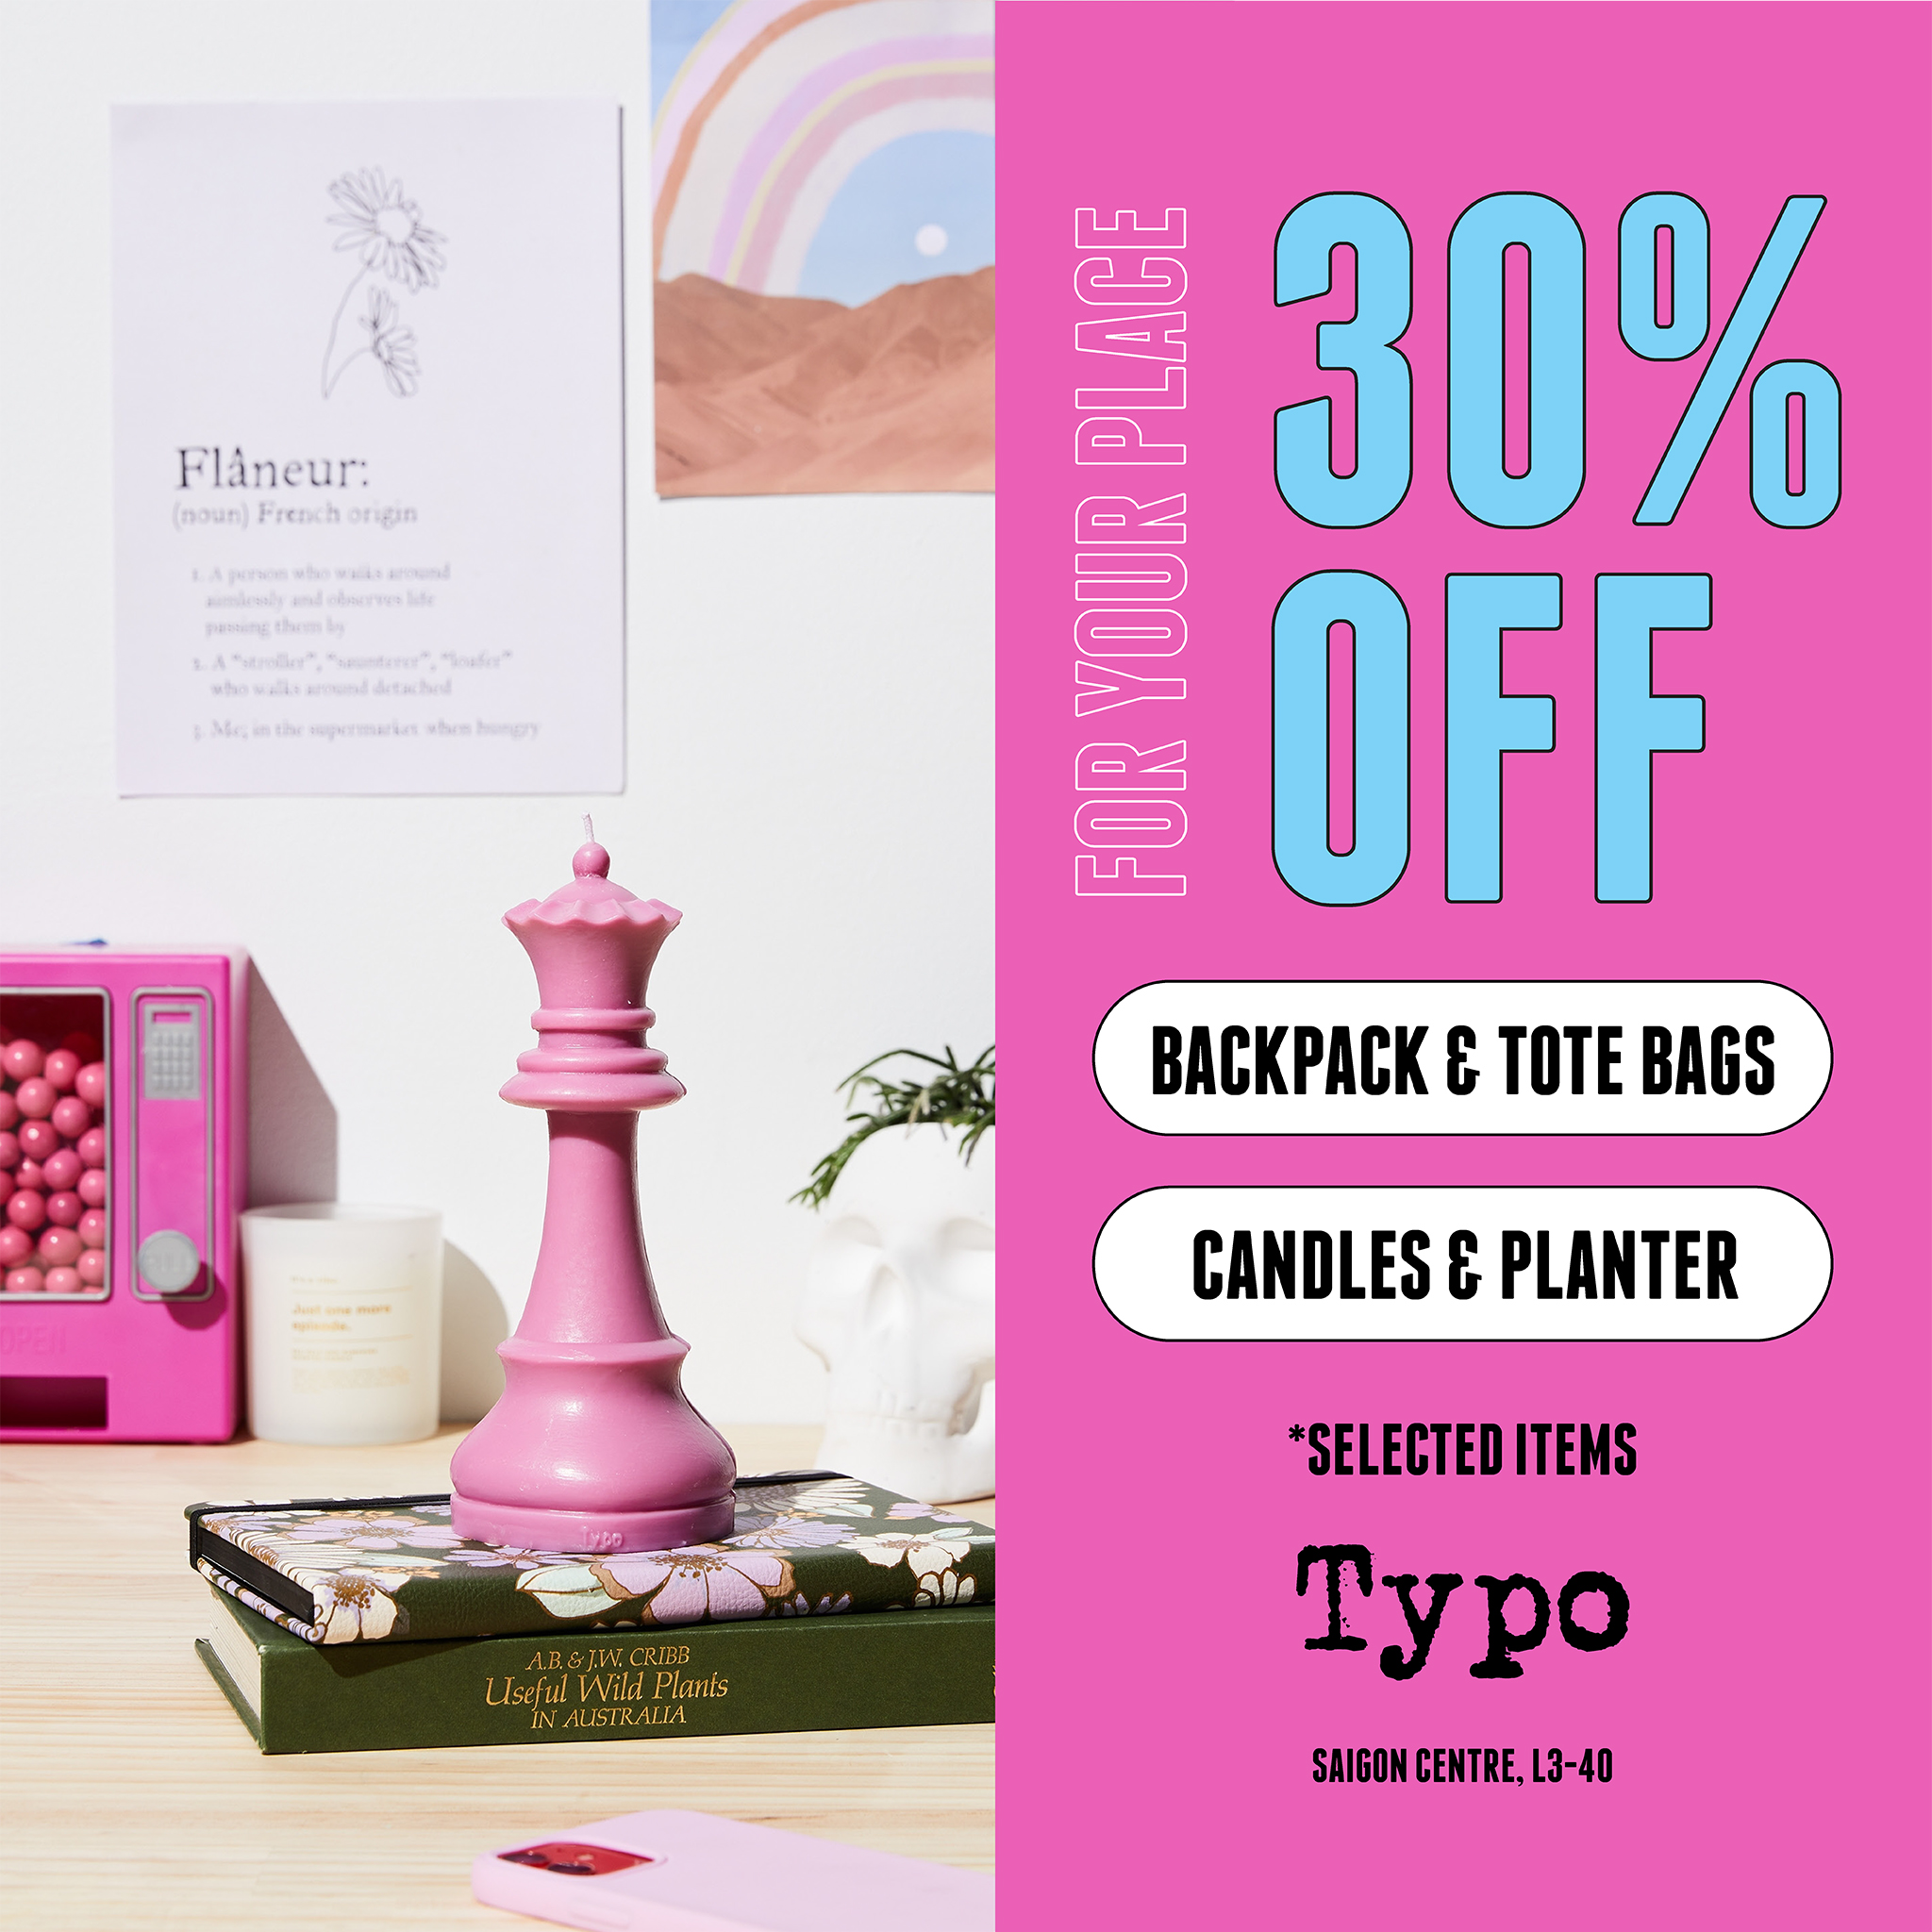 TYPO'S FAVE DEALS - 30% OFF FOR MANY ITEMS